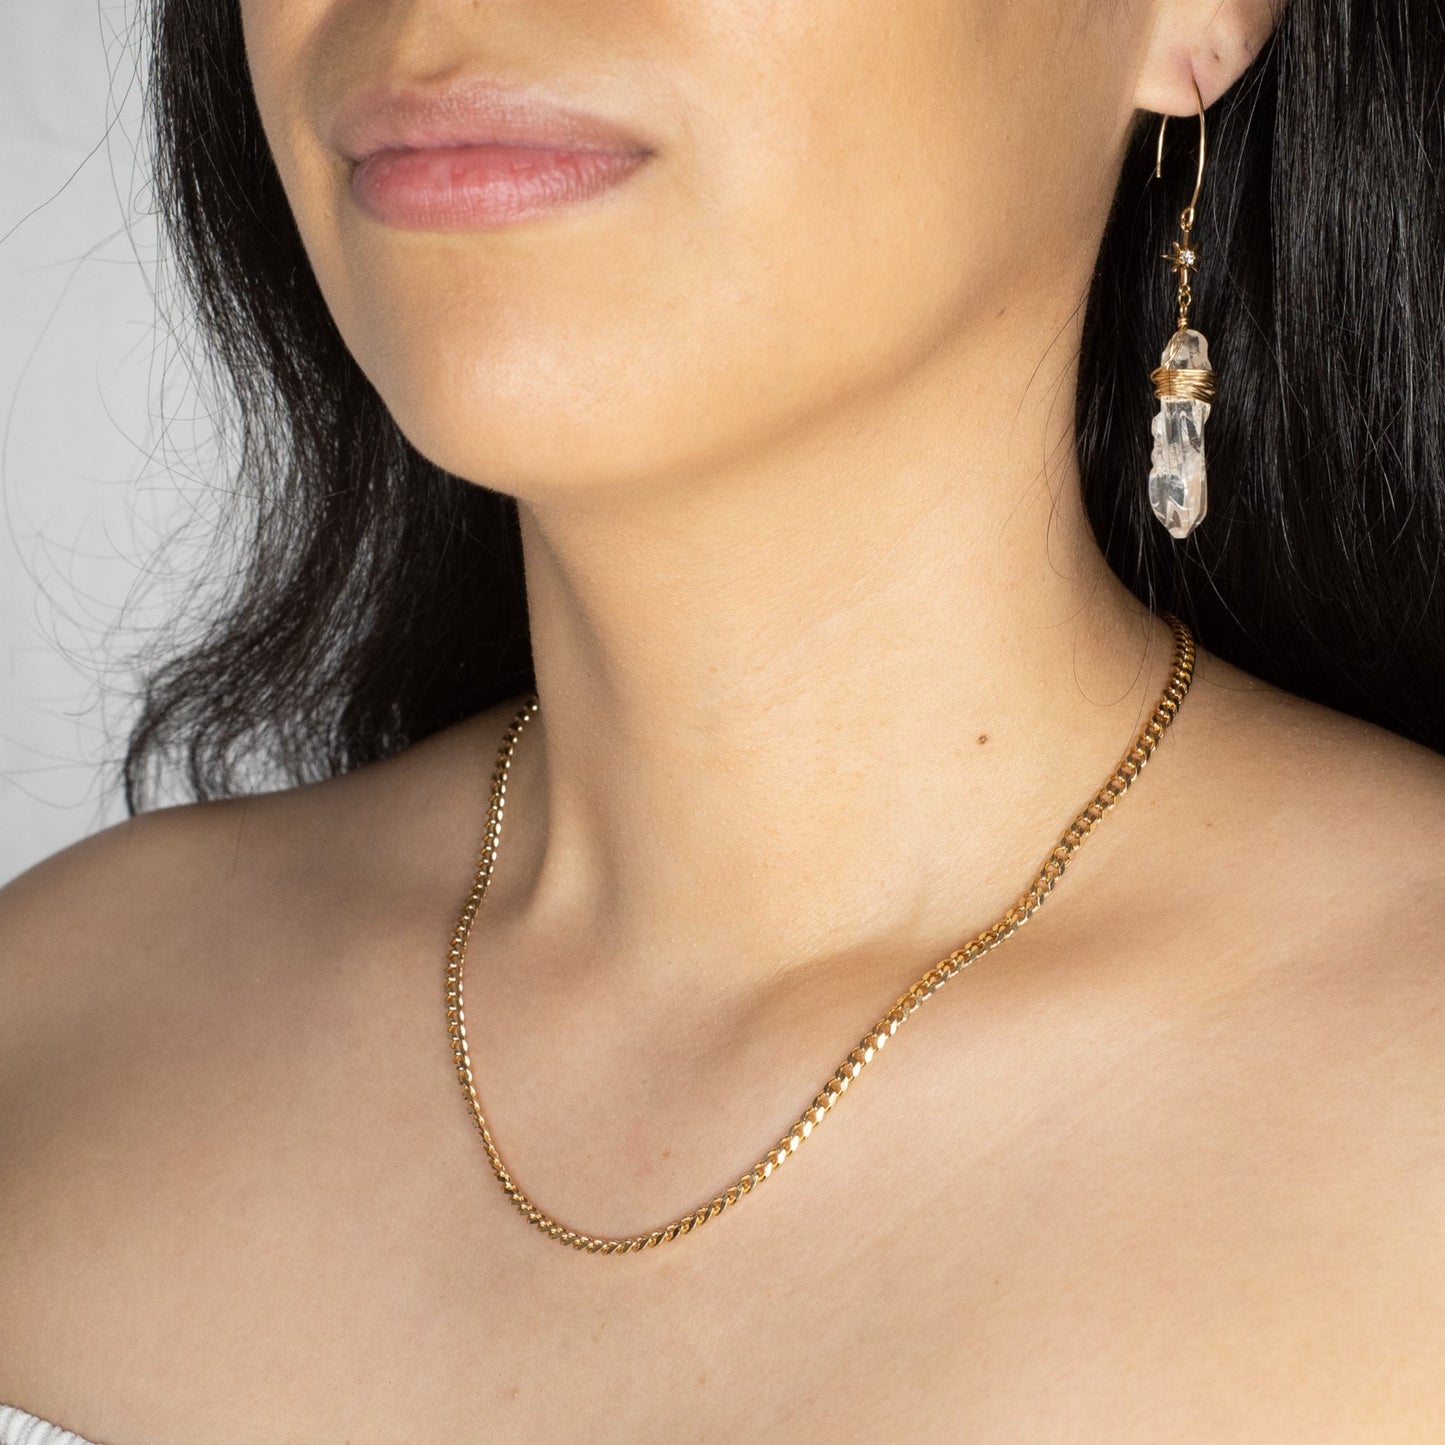 Thin Cuban Chain Necklace (18k Gold Filled)